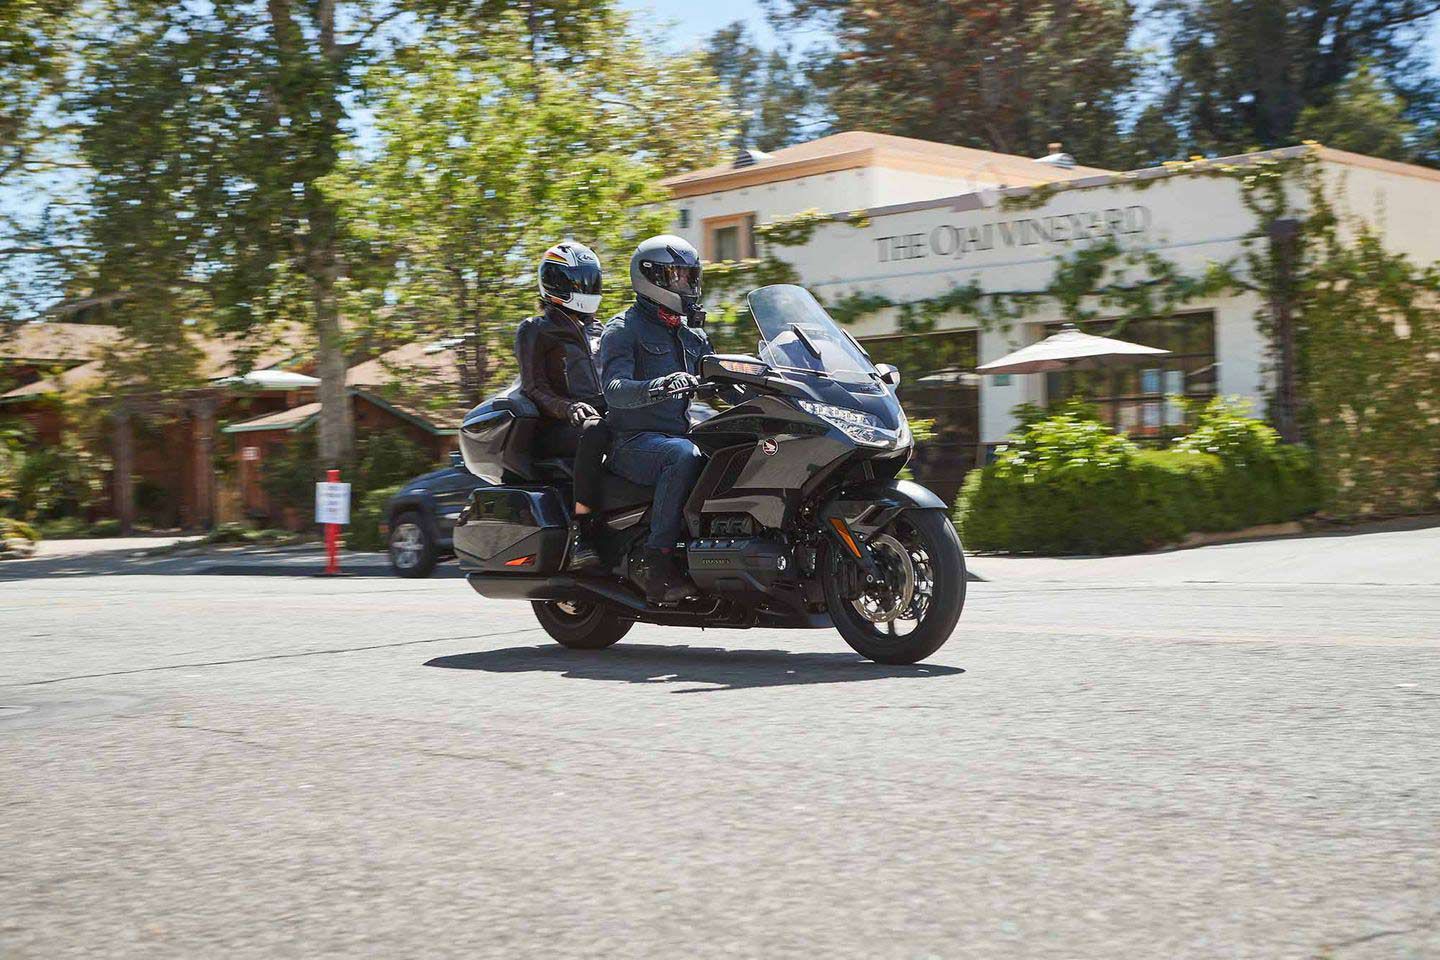 The Honda Gold Wing Tour is one of the finest motorcycles you can find for long-range, two-up riding.